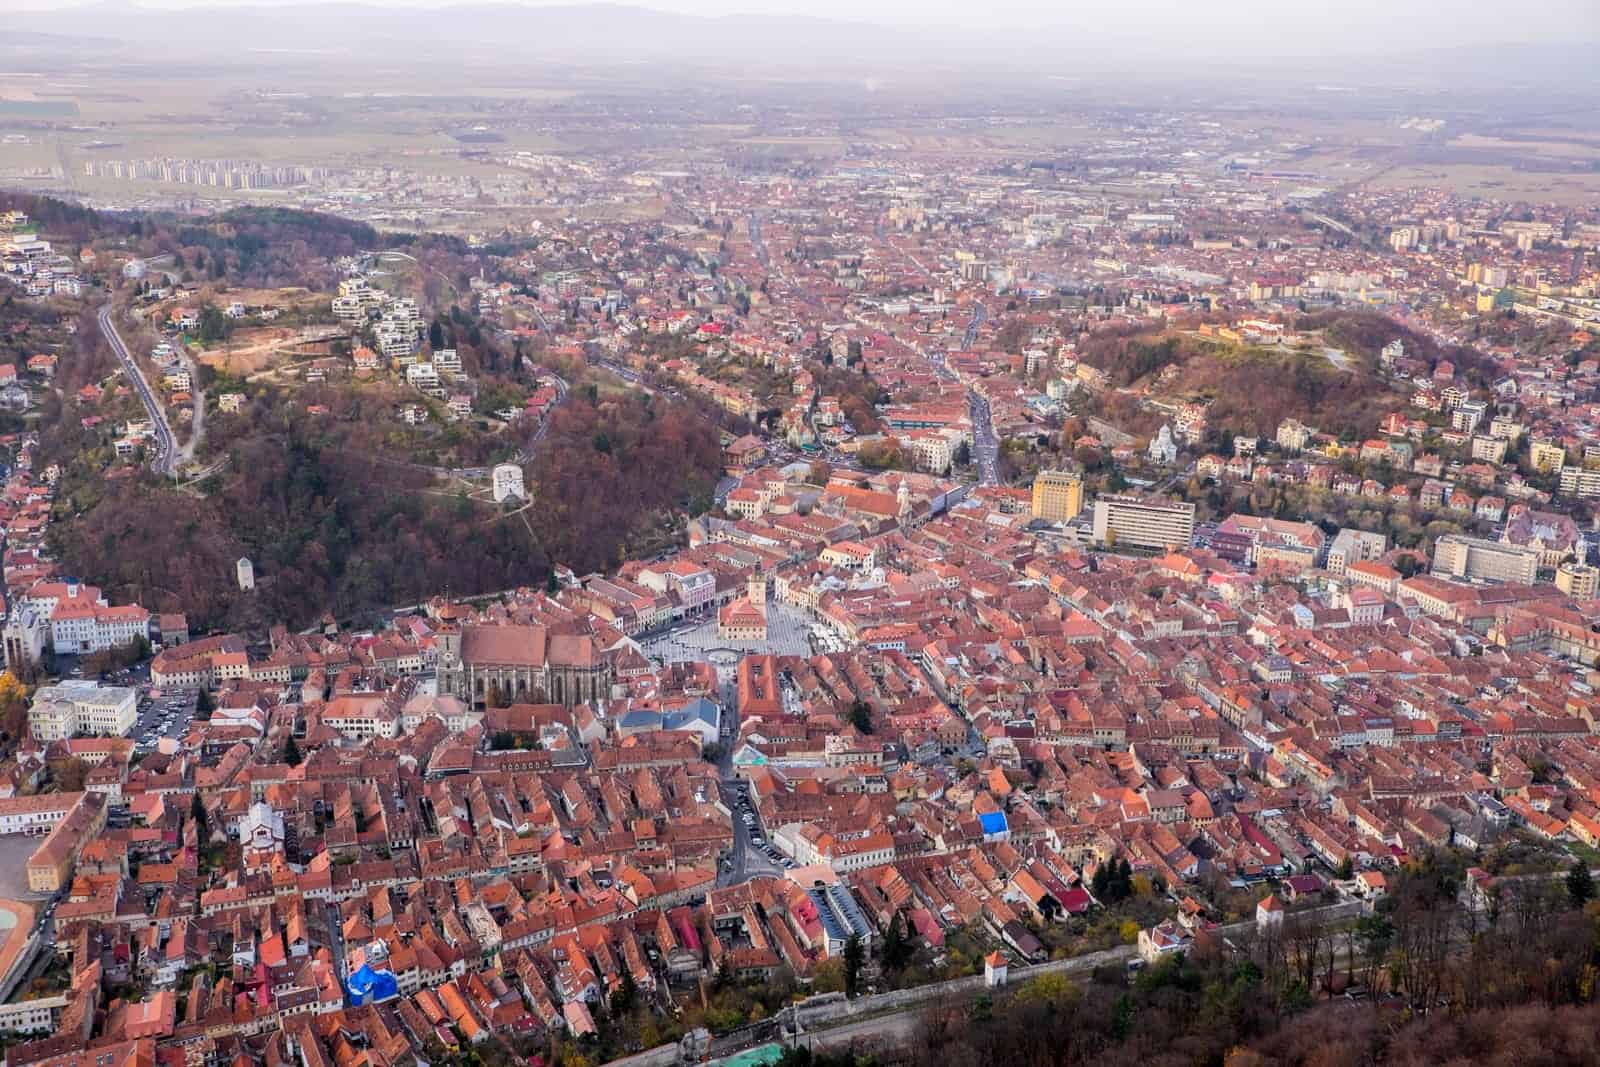 Elevated views of Brasov, Romania after hiking Tampa Mountain showing a mass of terracotta red houses and two circular patches of forest